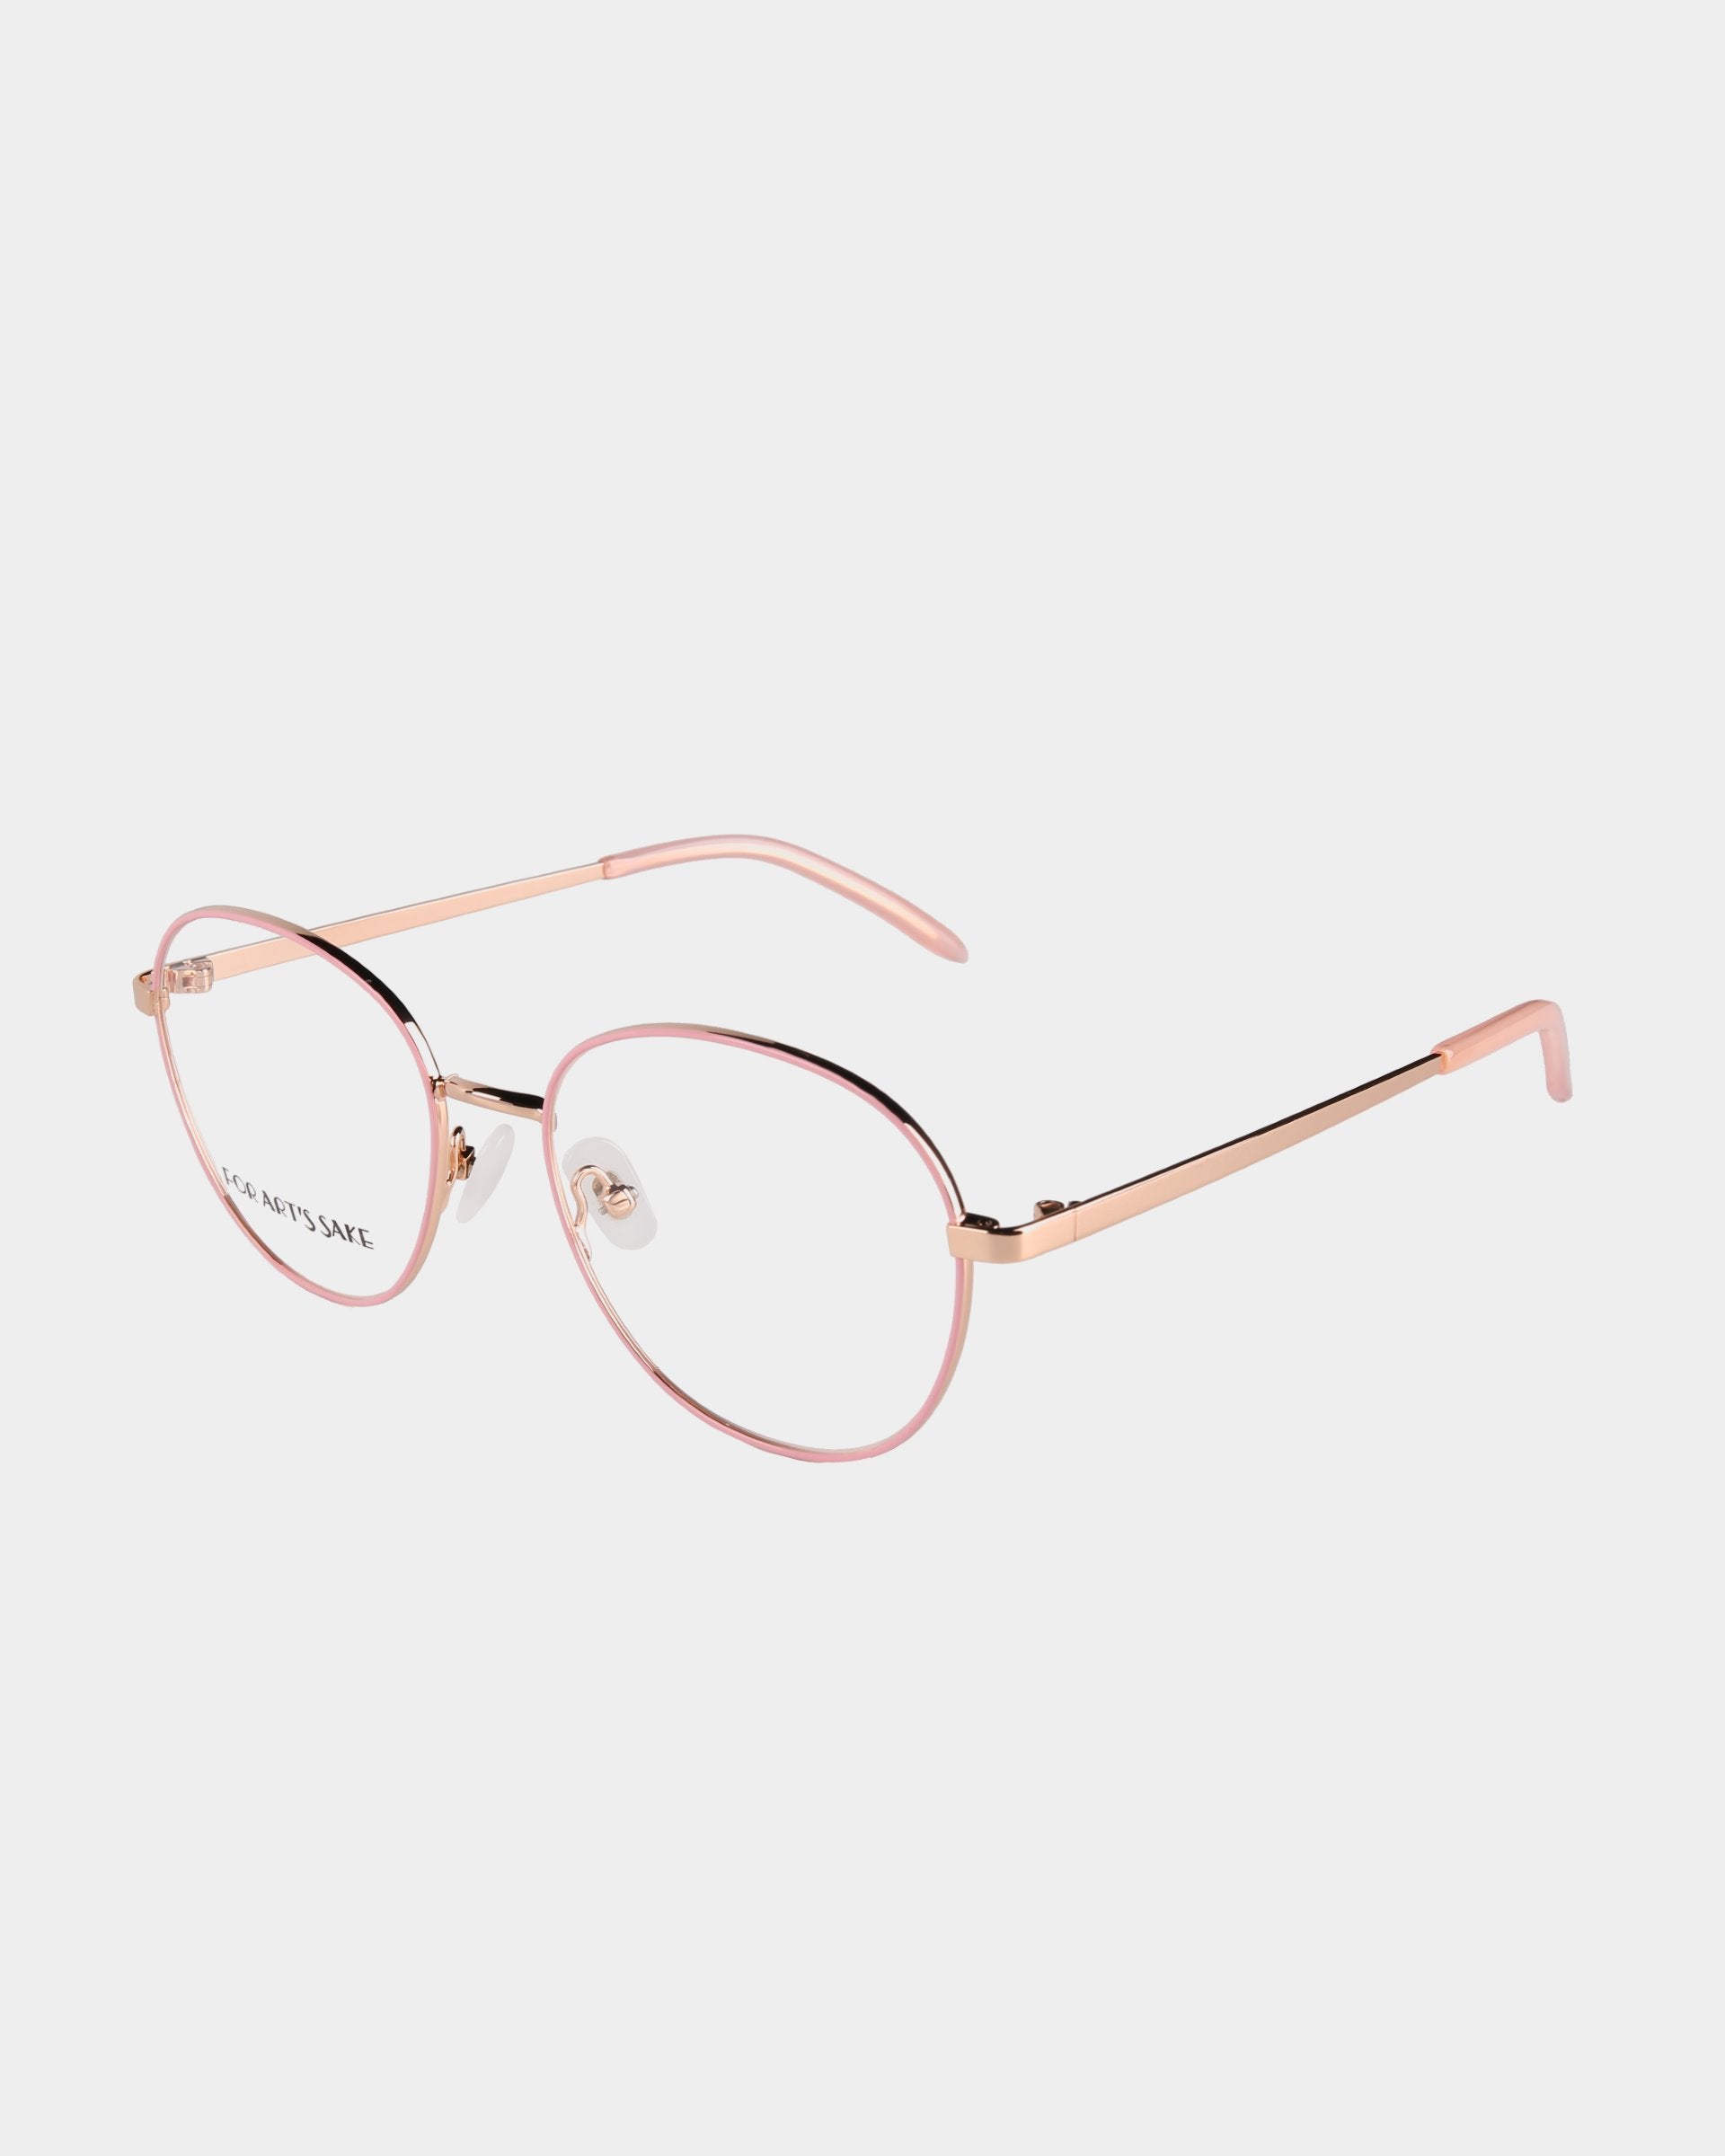 A pair of stylish eyeglasses with round pink frames, thin gold arms, and adjustable nose pads. The clear lenses feature a Blue Light Filter, and the ends of the arms are pink, complementing the frame color. These glasses come with an optional Prescription Service and are set against a plain white background. The product is named Hailey from For Art's Sake®.